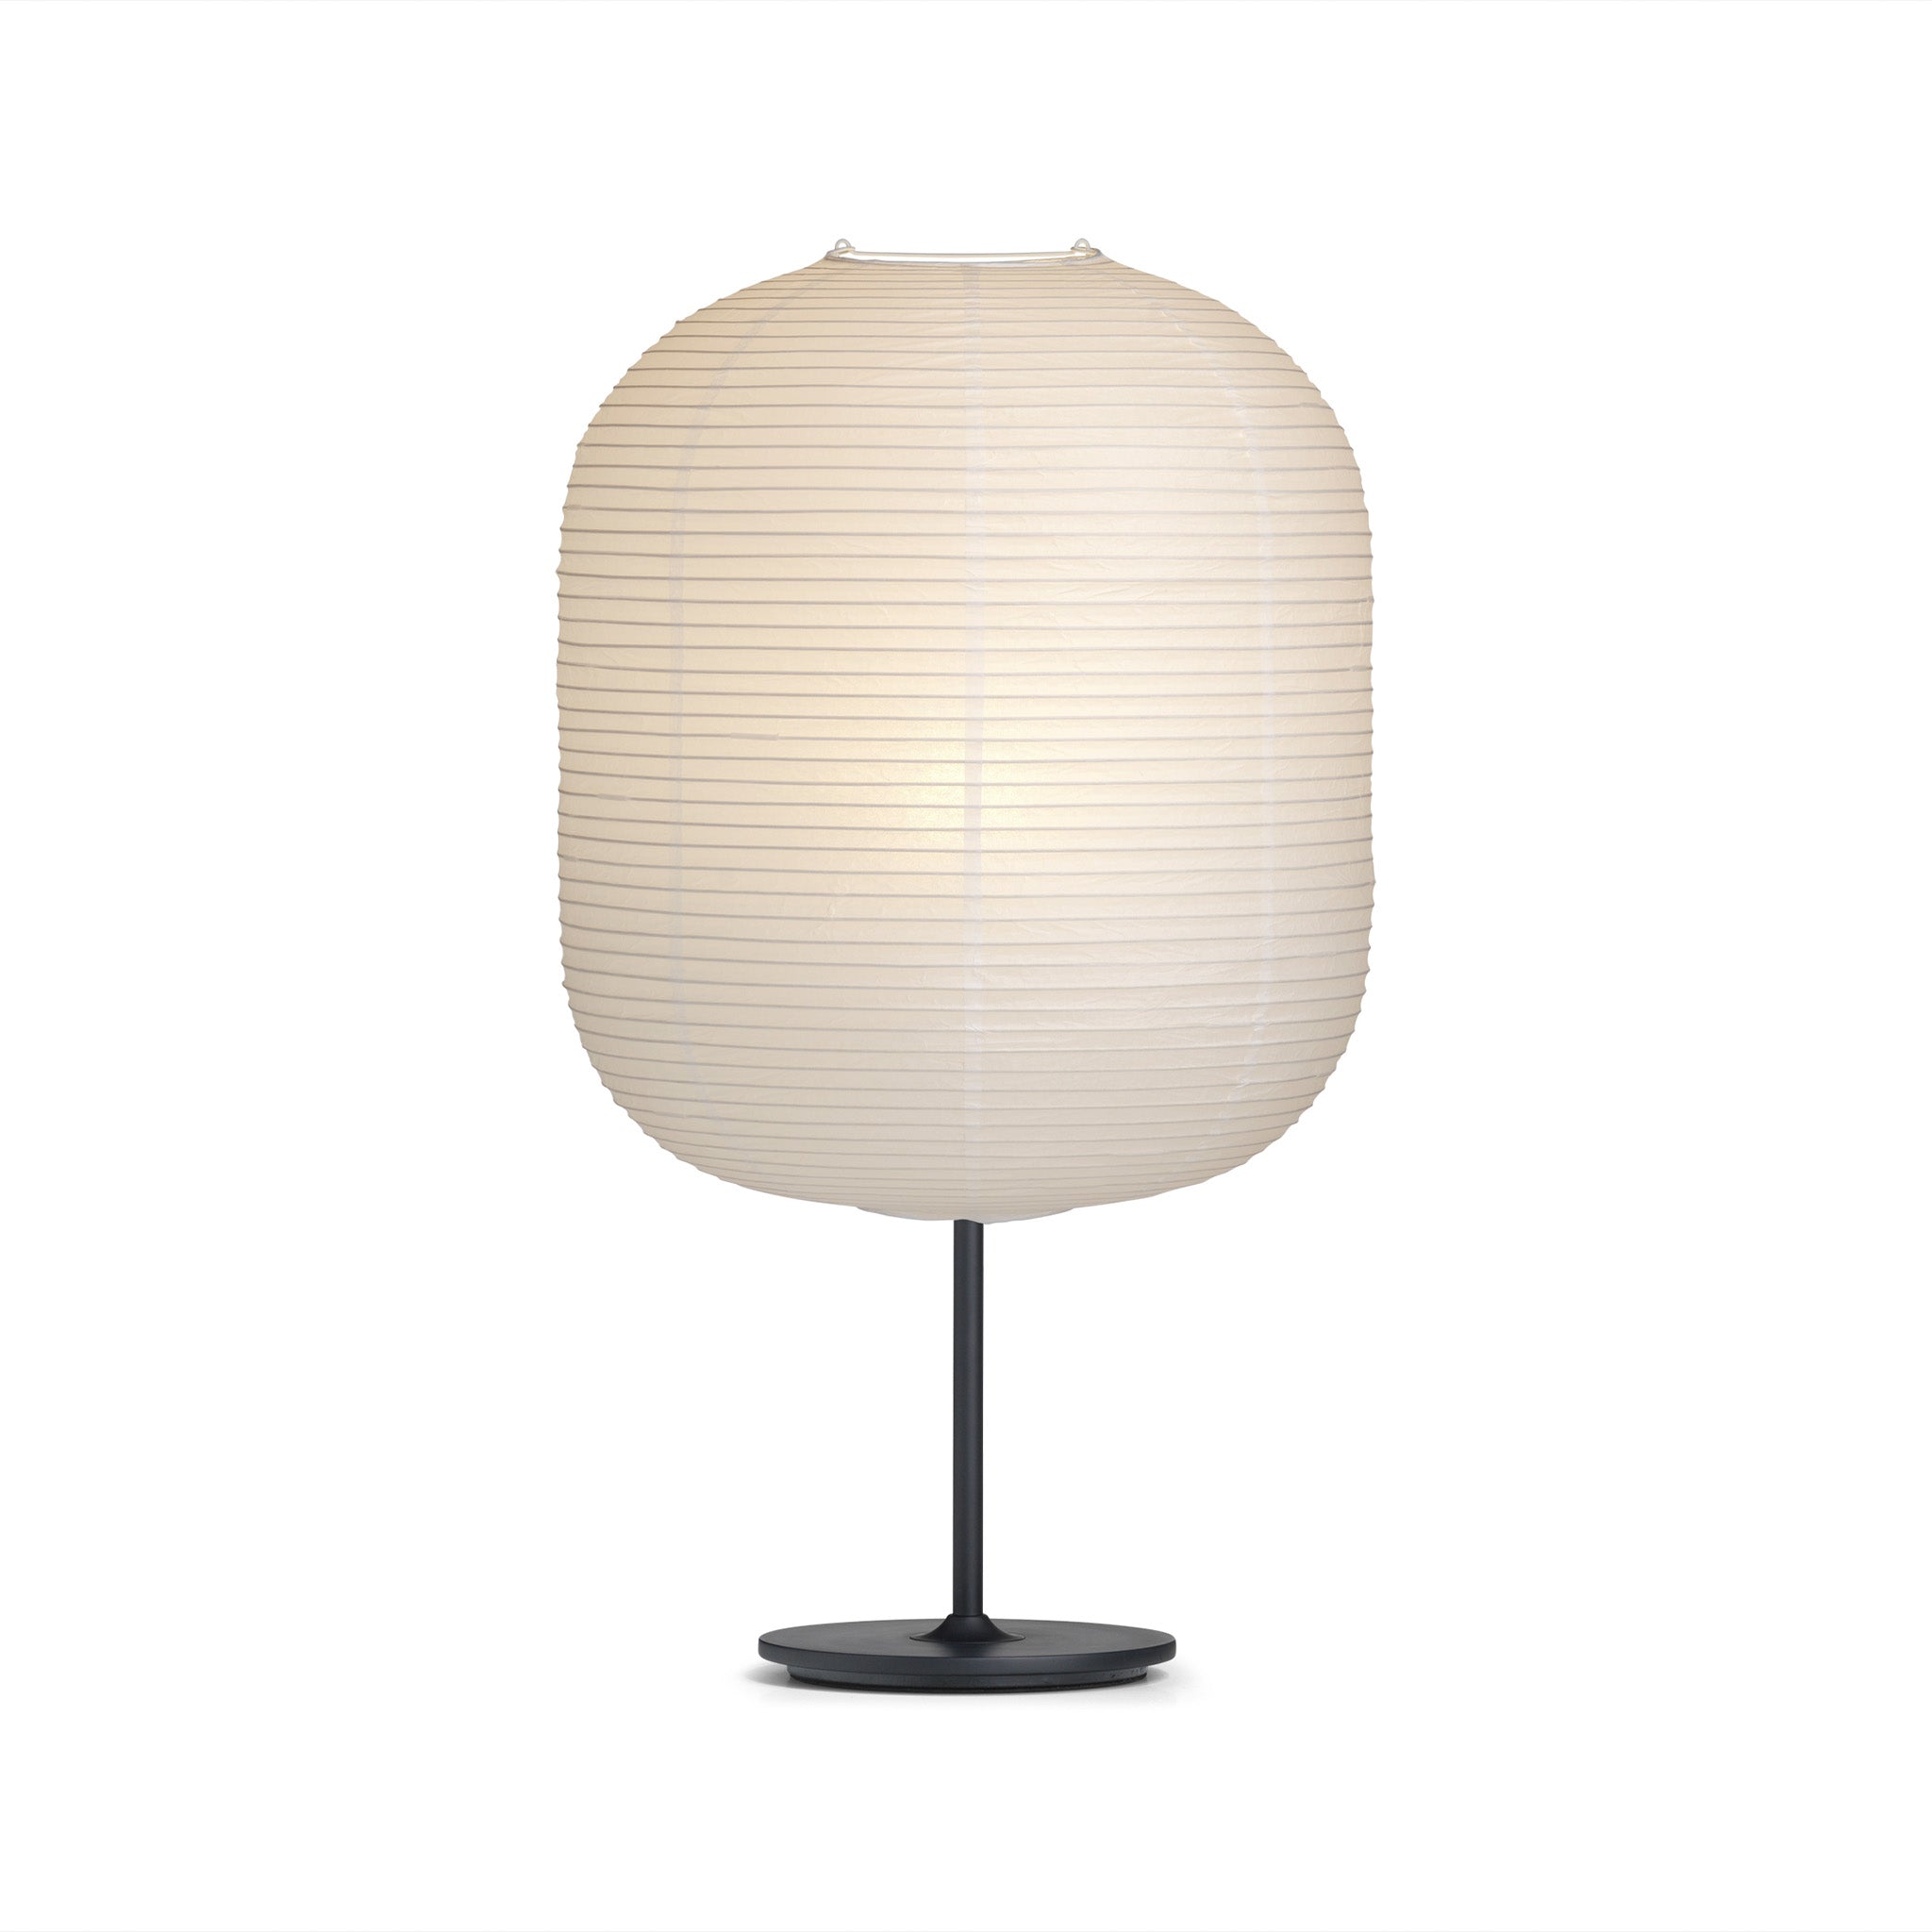 Common Table Lamp By Hay